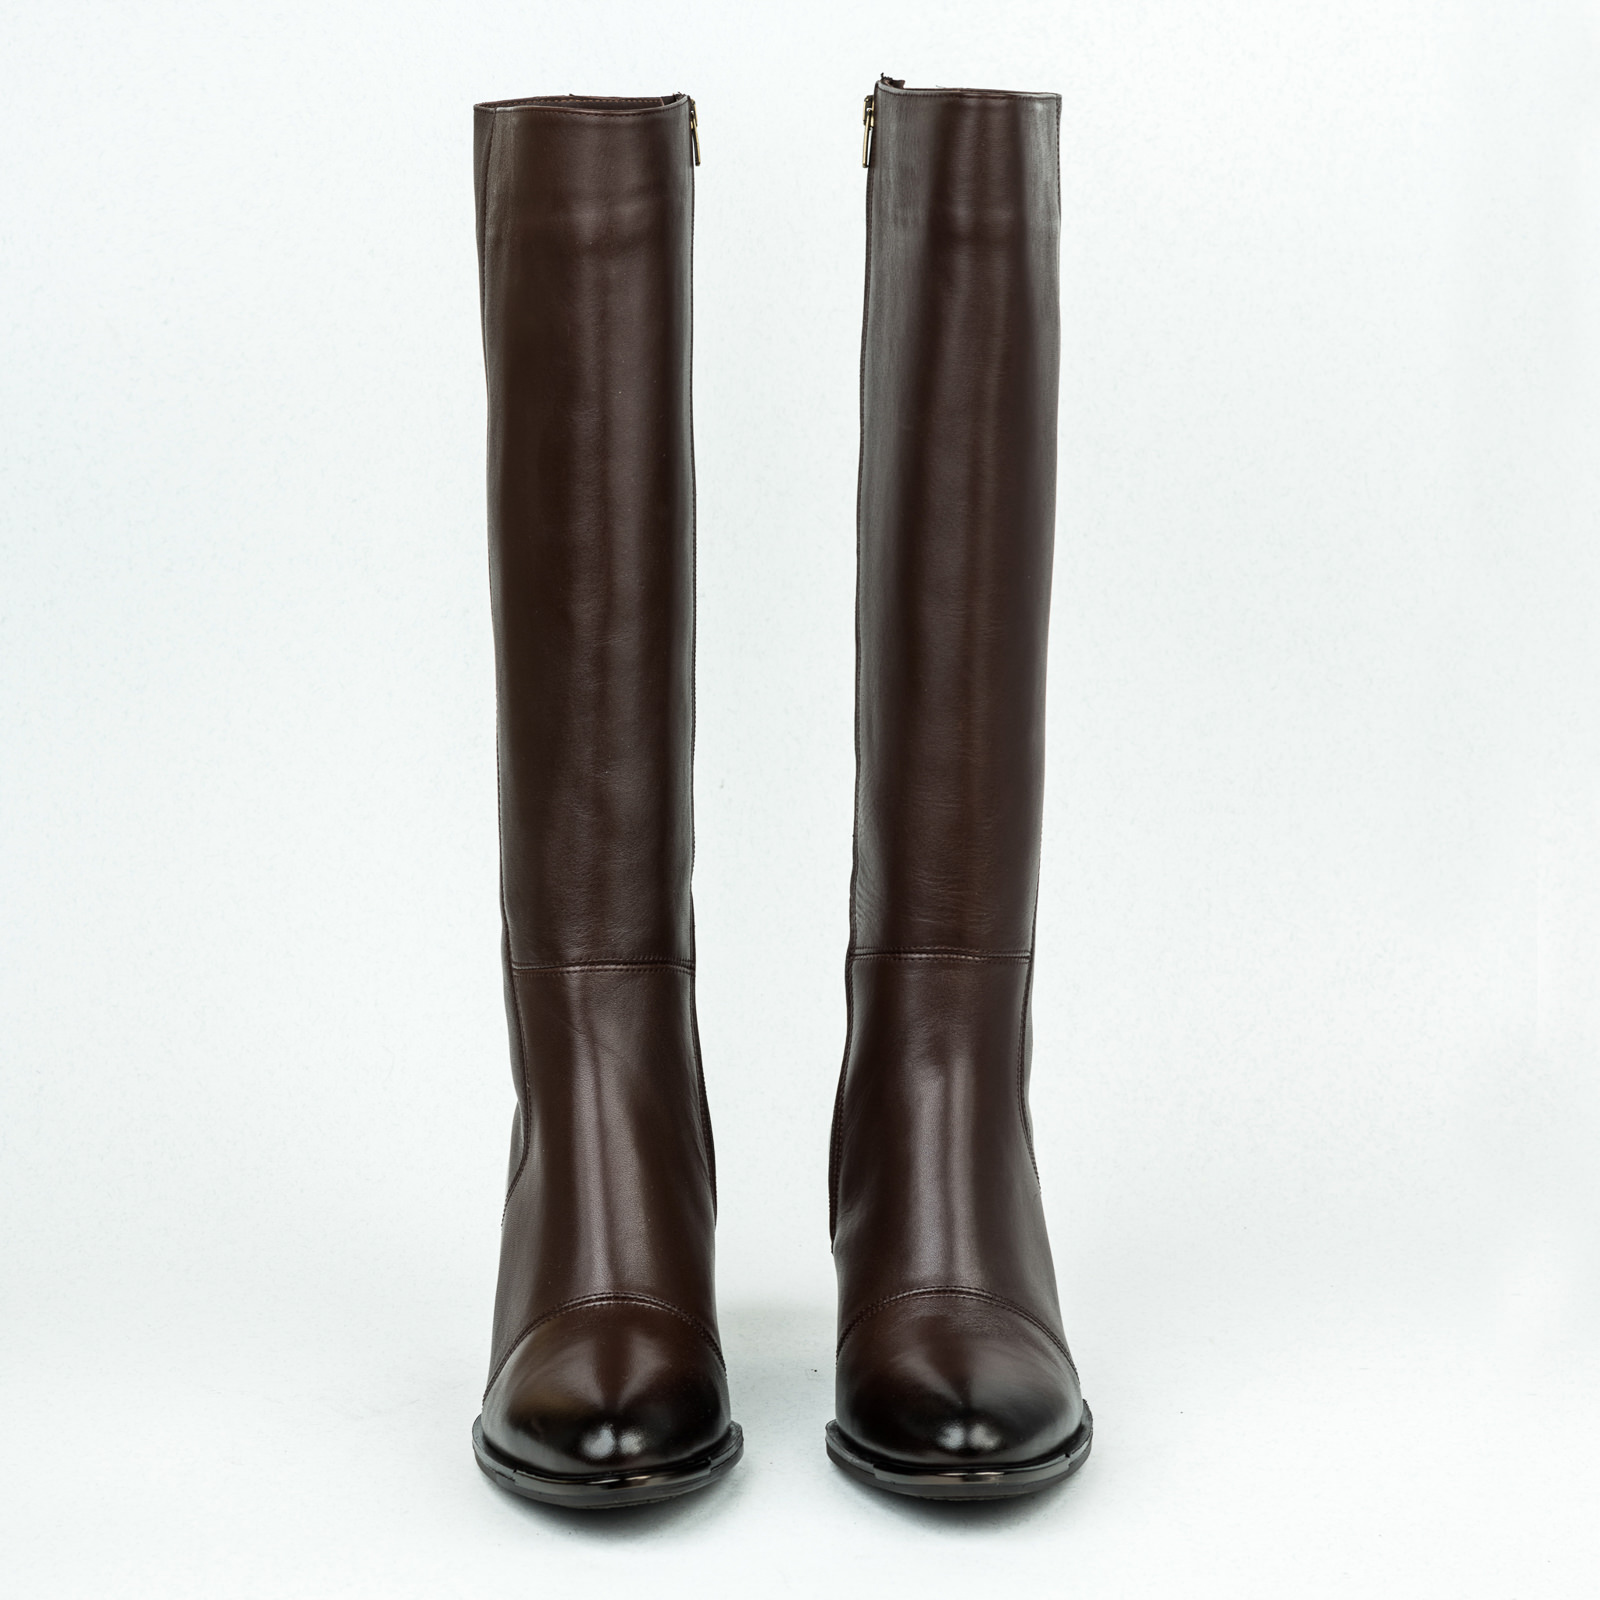 Leather boots B149 - BROWN